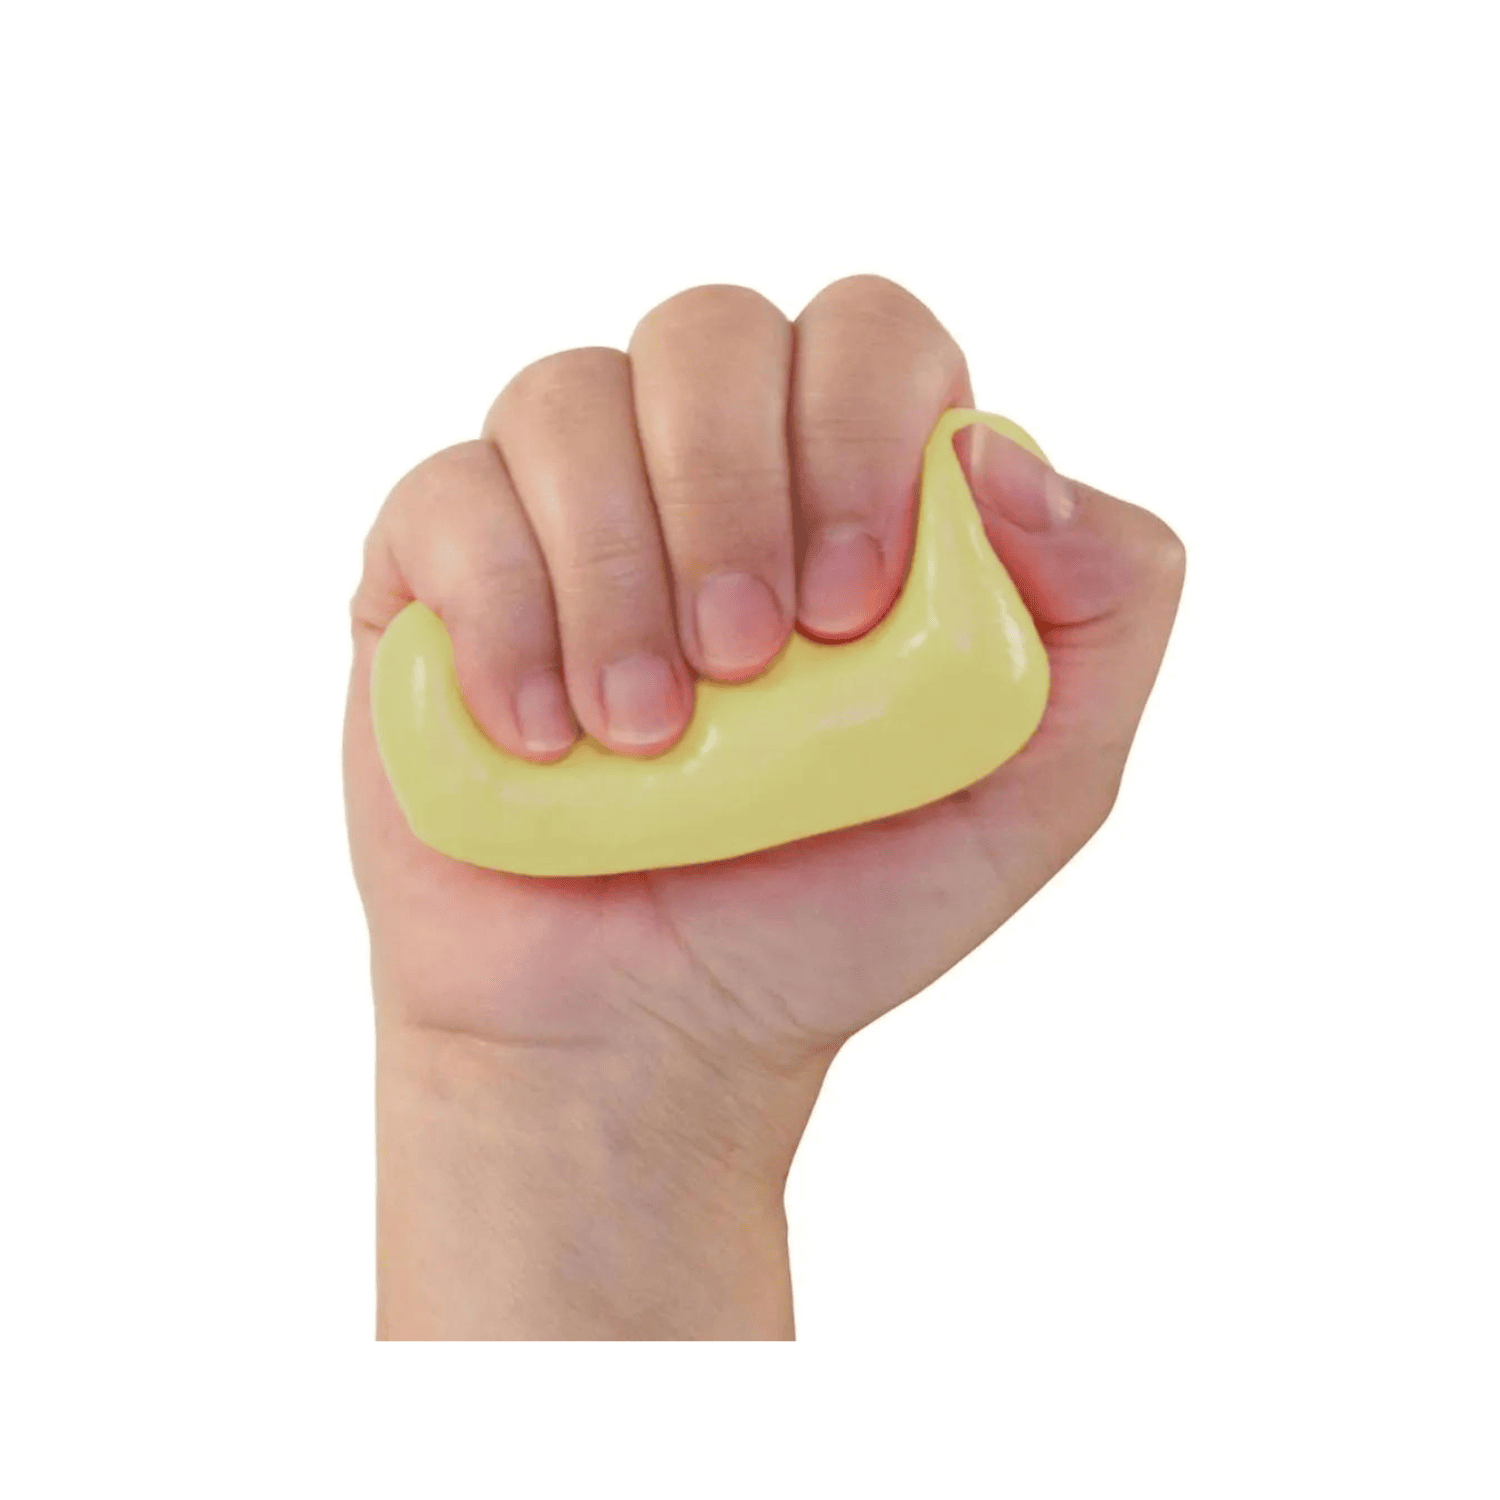 Rolyan Therapeutic Exercise Putty_Yellow Soft